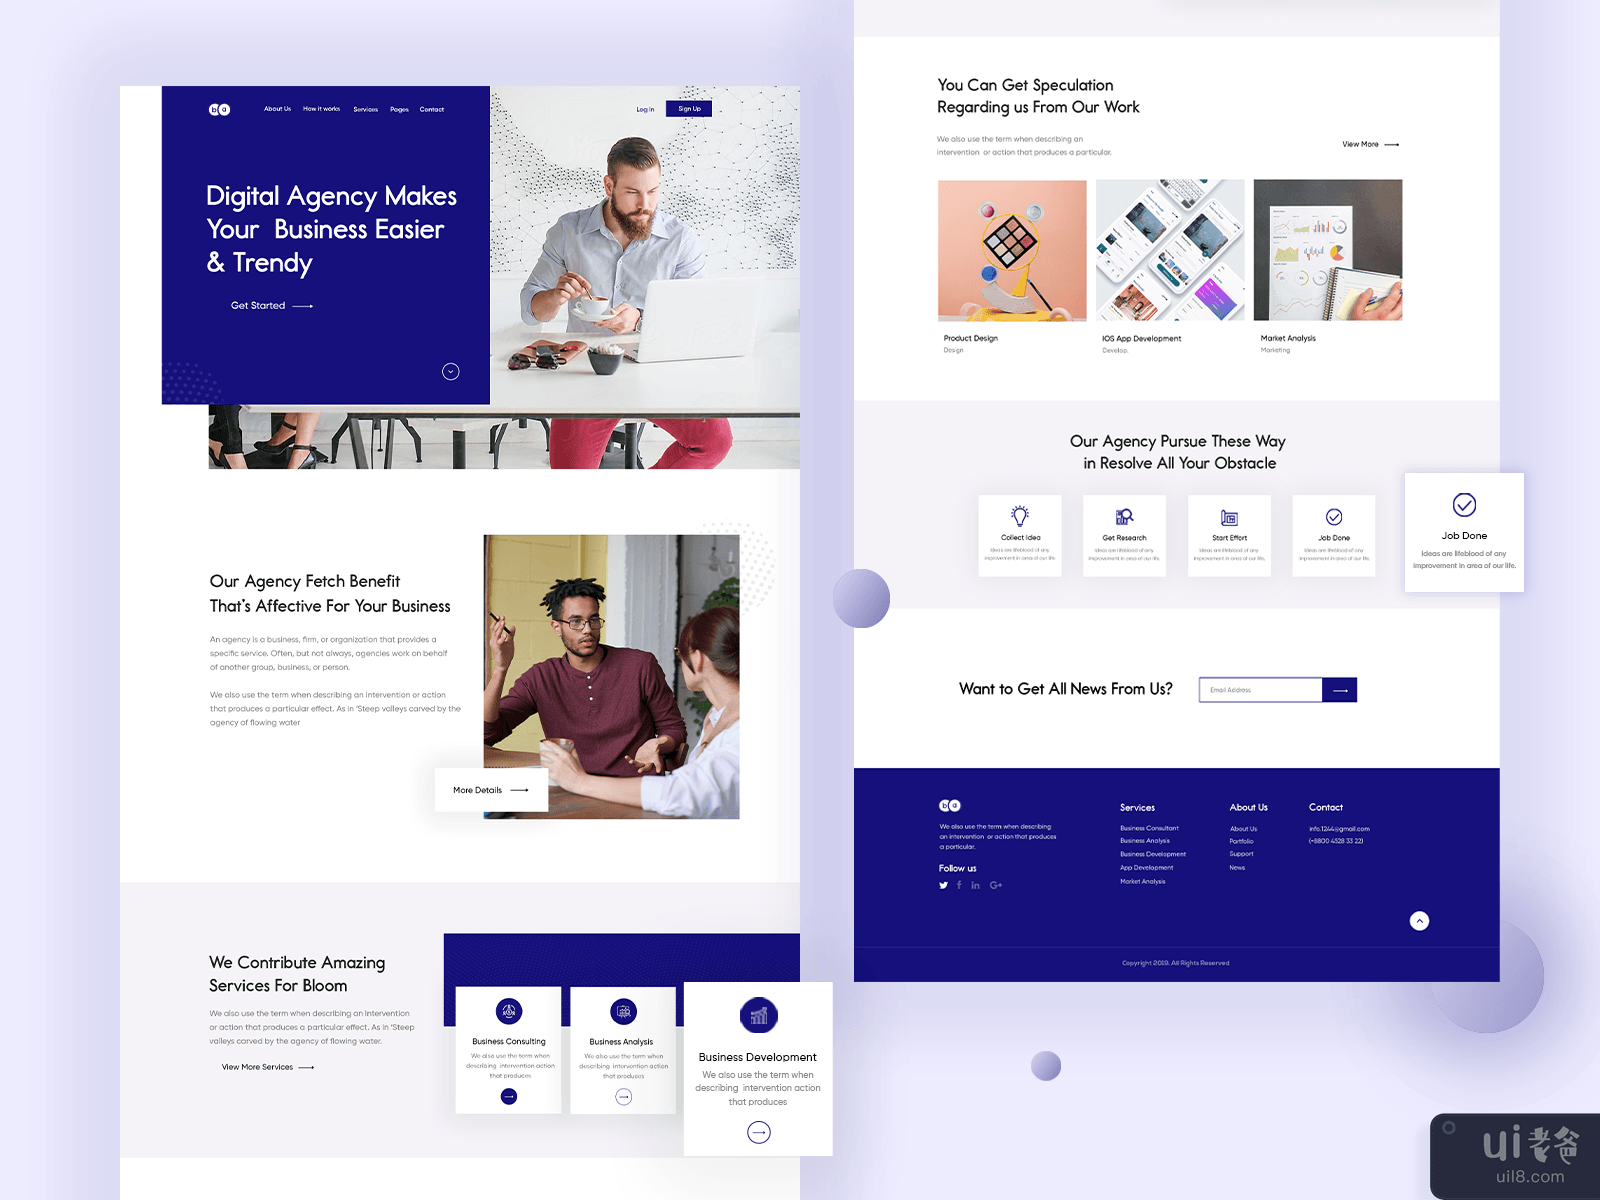 Business Agency Landing Page